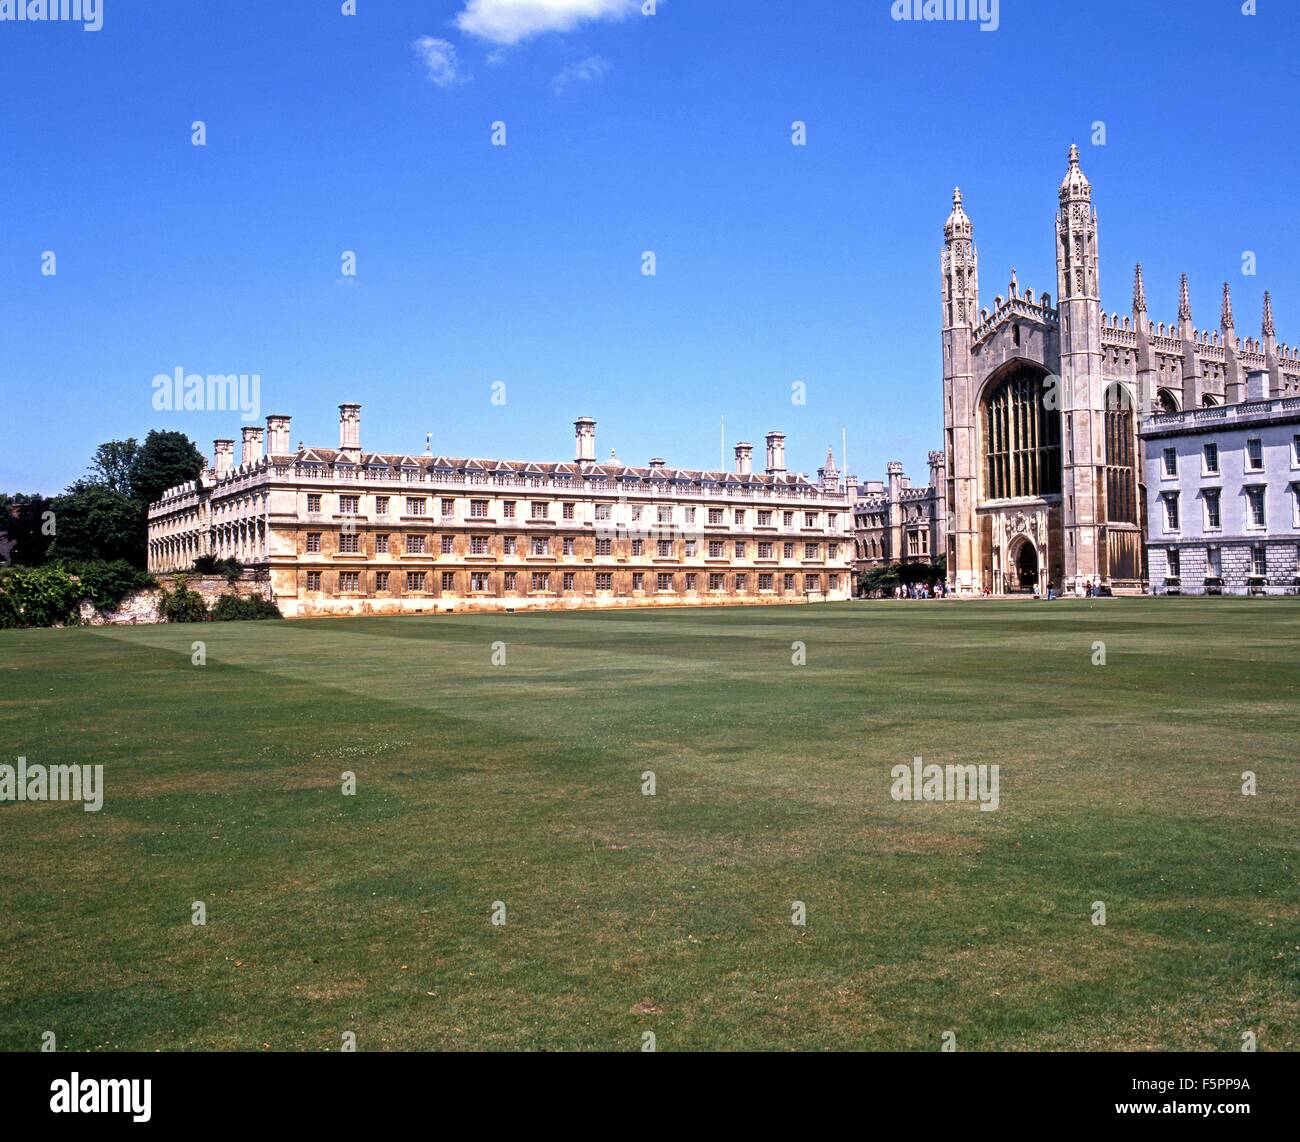 View of Kings College during the Summertime, Cambridge; Cambridgeshire, England, UK, Western Europe. Stock Photo